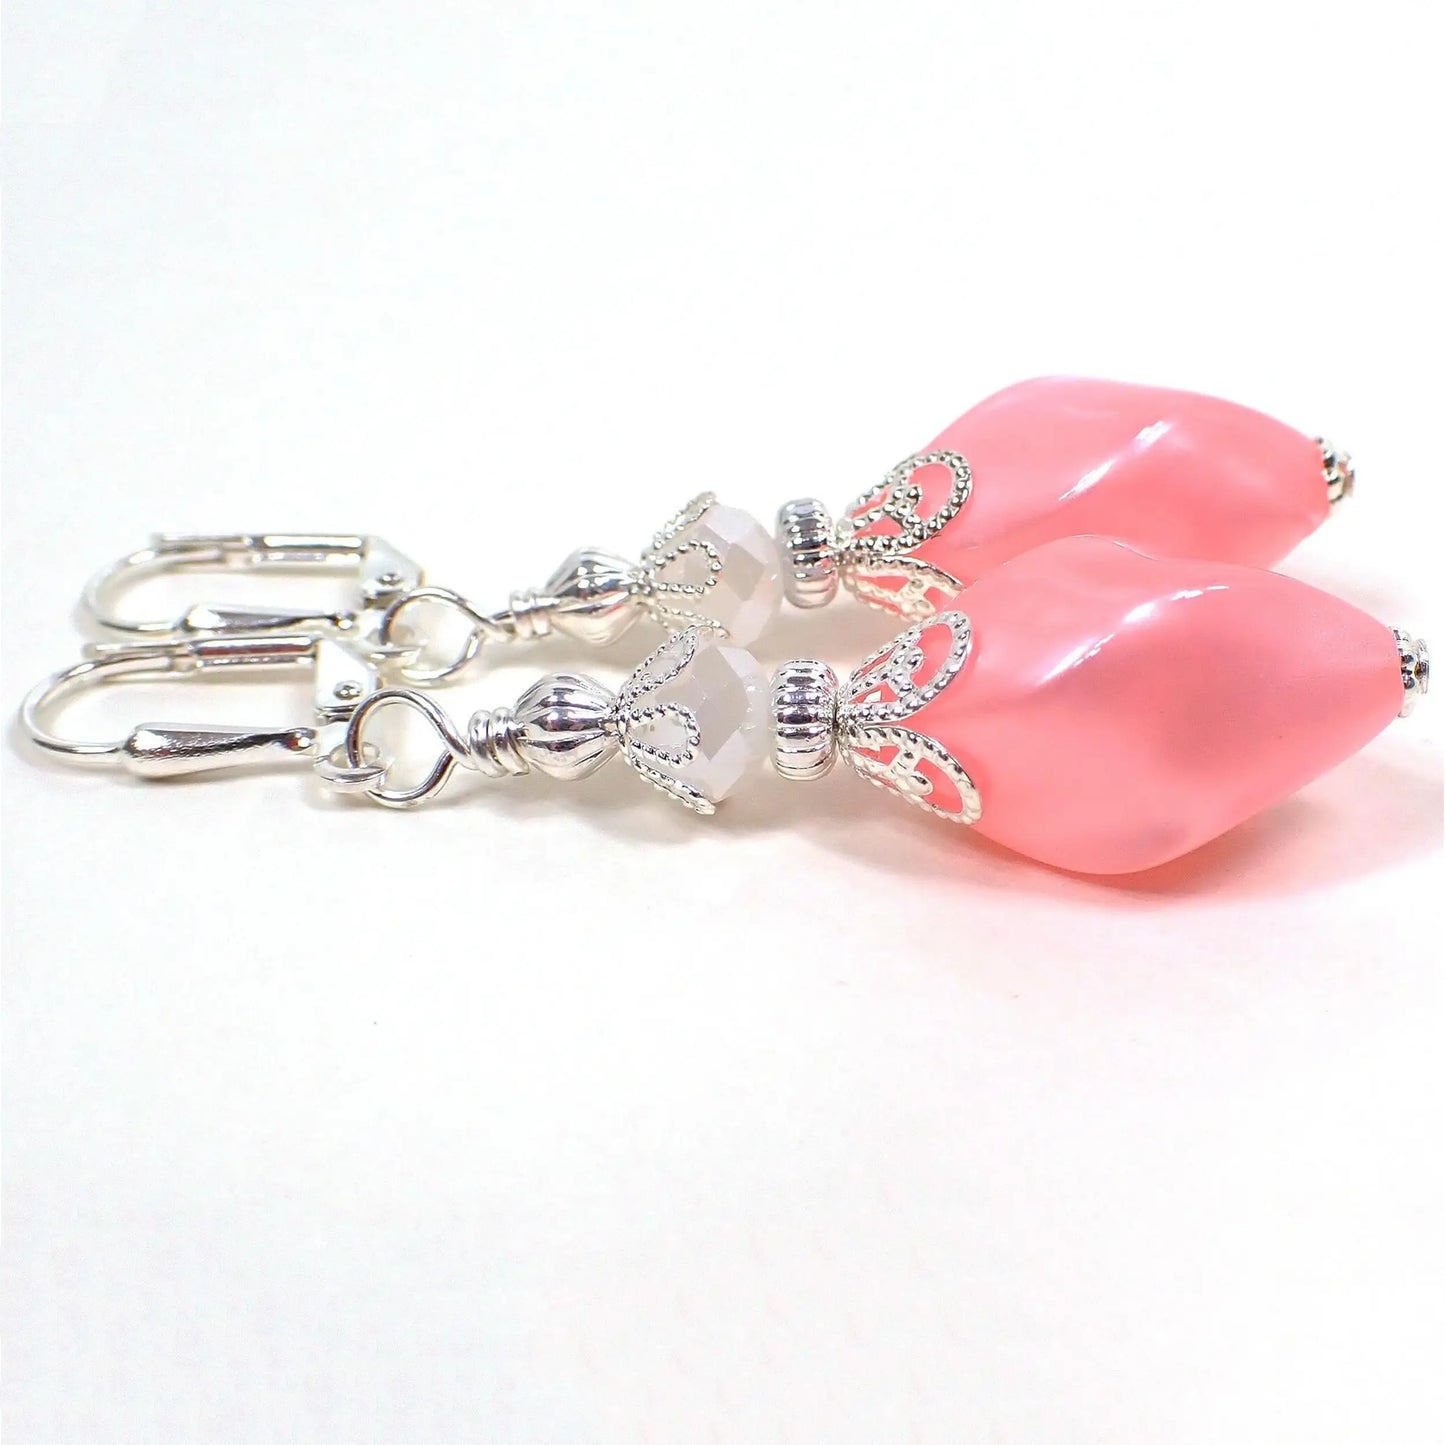 Side view of the handmade drop earrings with vintage lucite beads. The metal is silver plated in color. There are pearly white faceted glass crystal beads at the top. The bottom lucite beads are a twisted oval shape and are pearly pink in color.